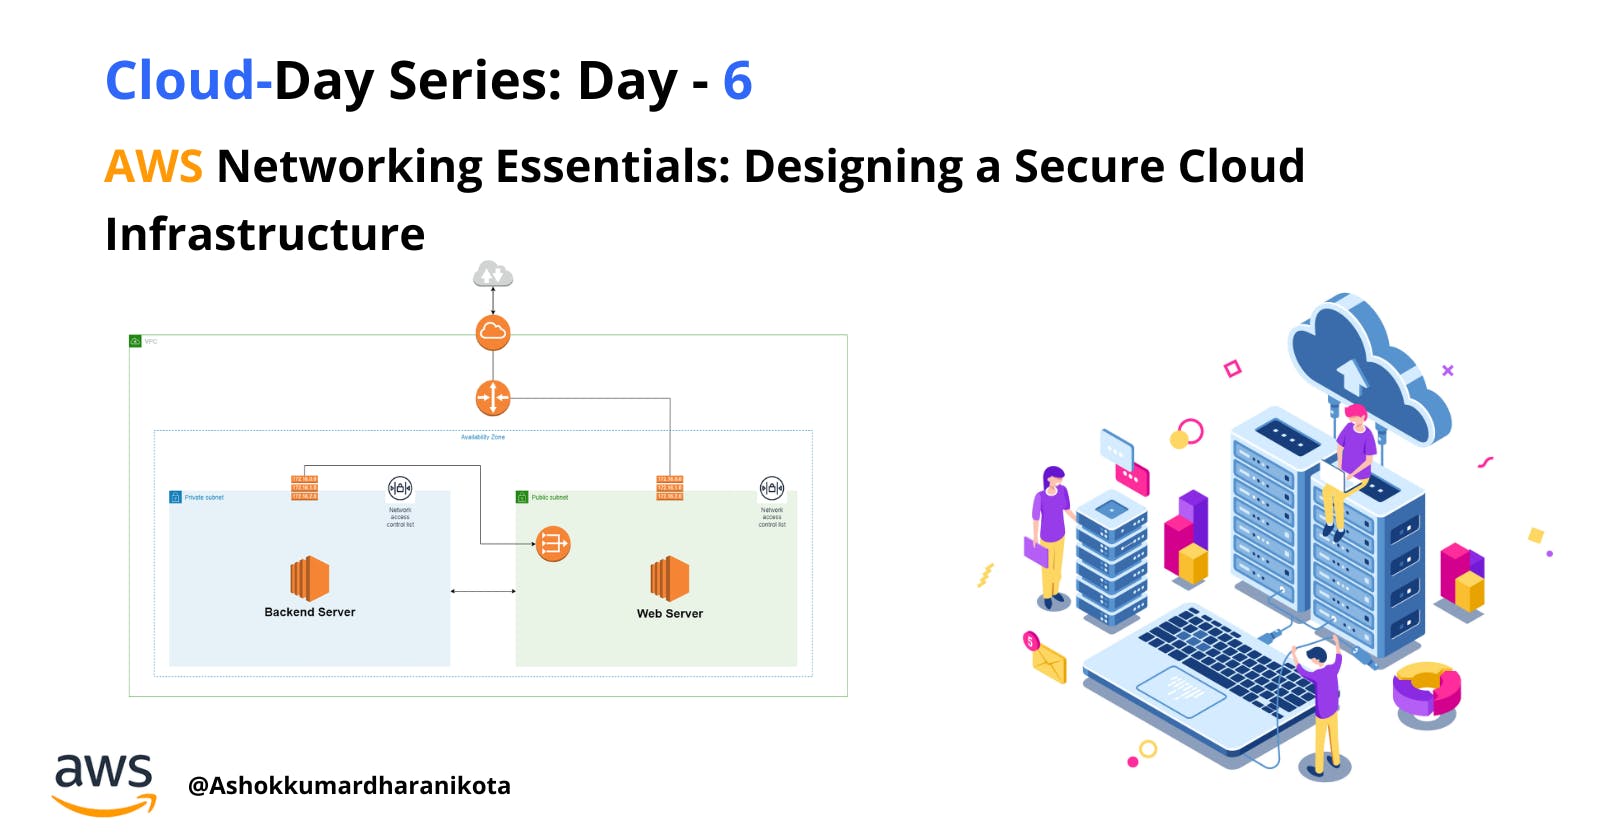 AWS Networking Essentials: Designing a Secure Cloud Infrastructure